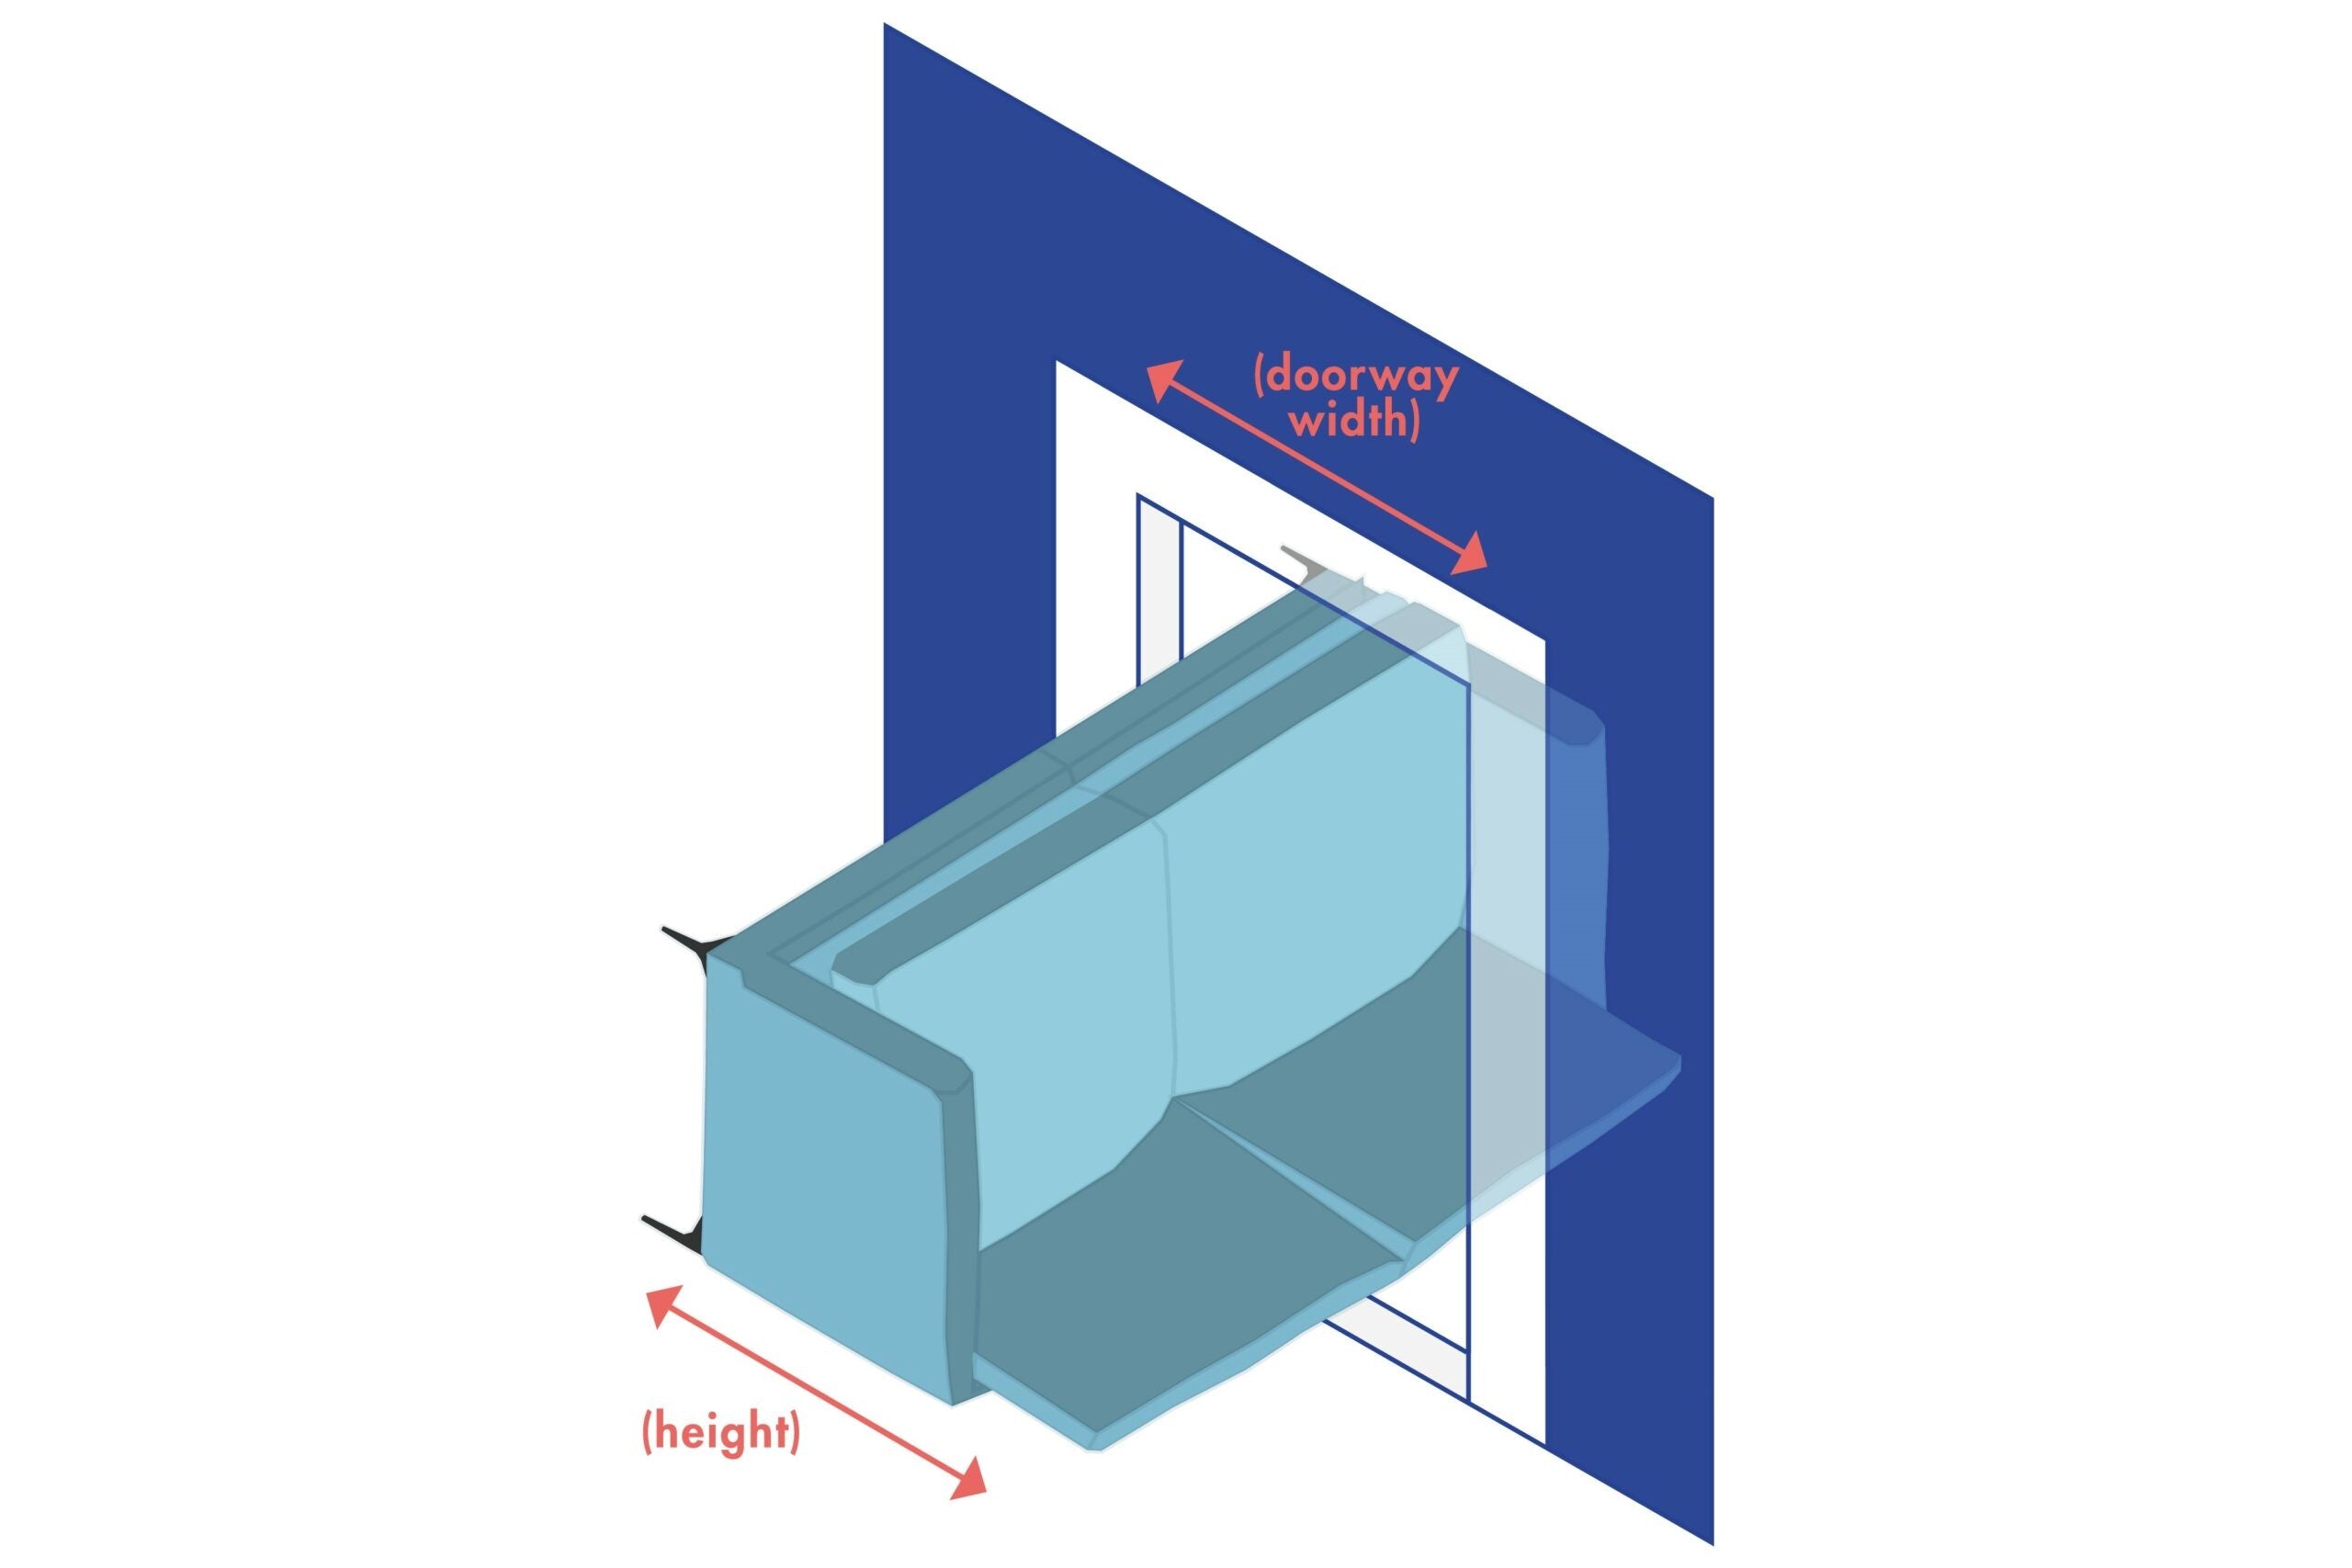 An isometric diagram illustrating how to measure a couch for fitting through a doorway.